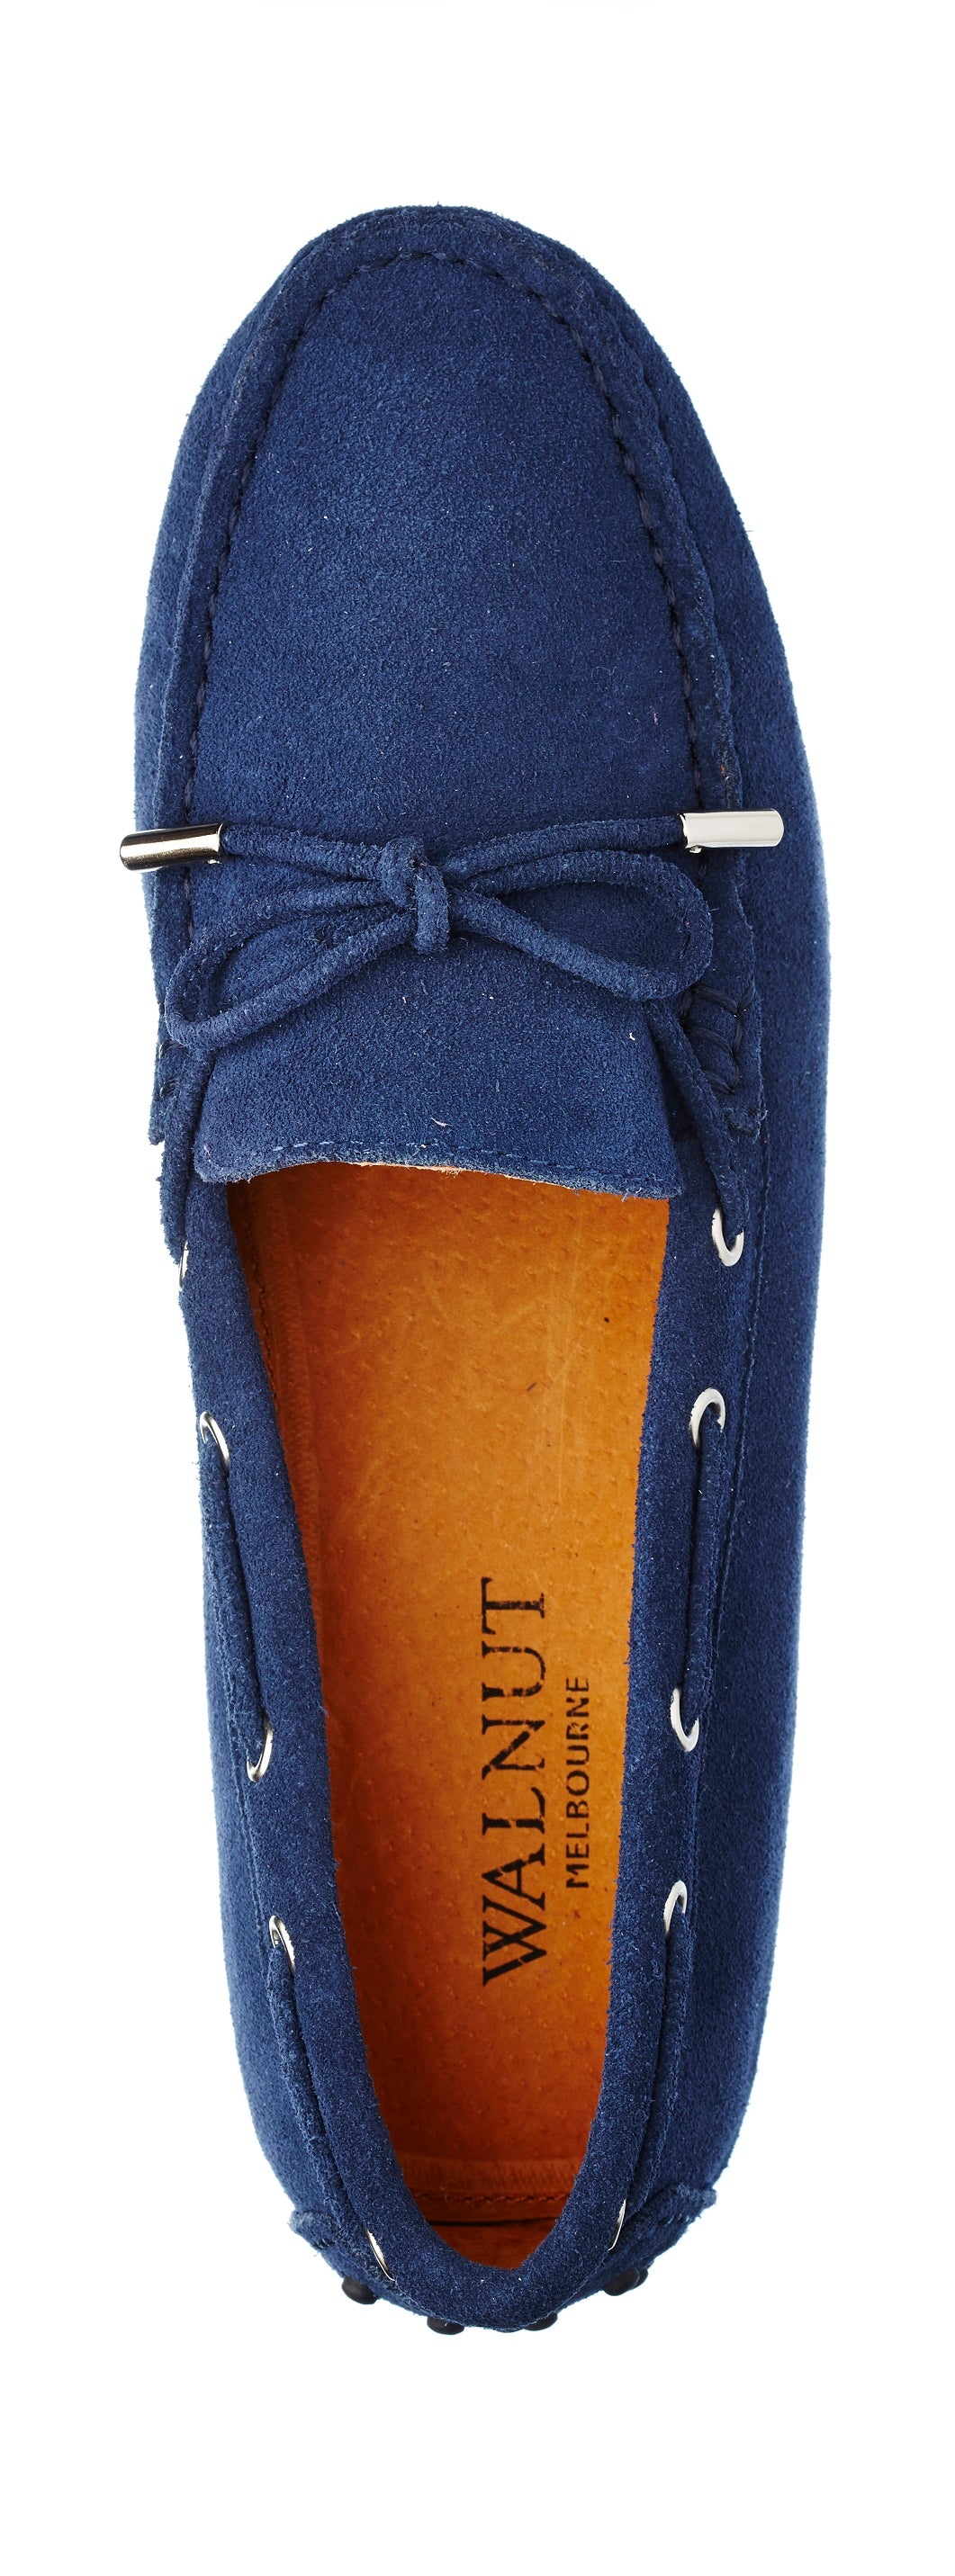 DARIA SUEDE LOAFER Pale Blue Side View